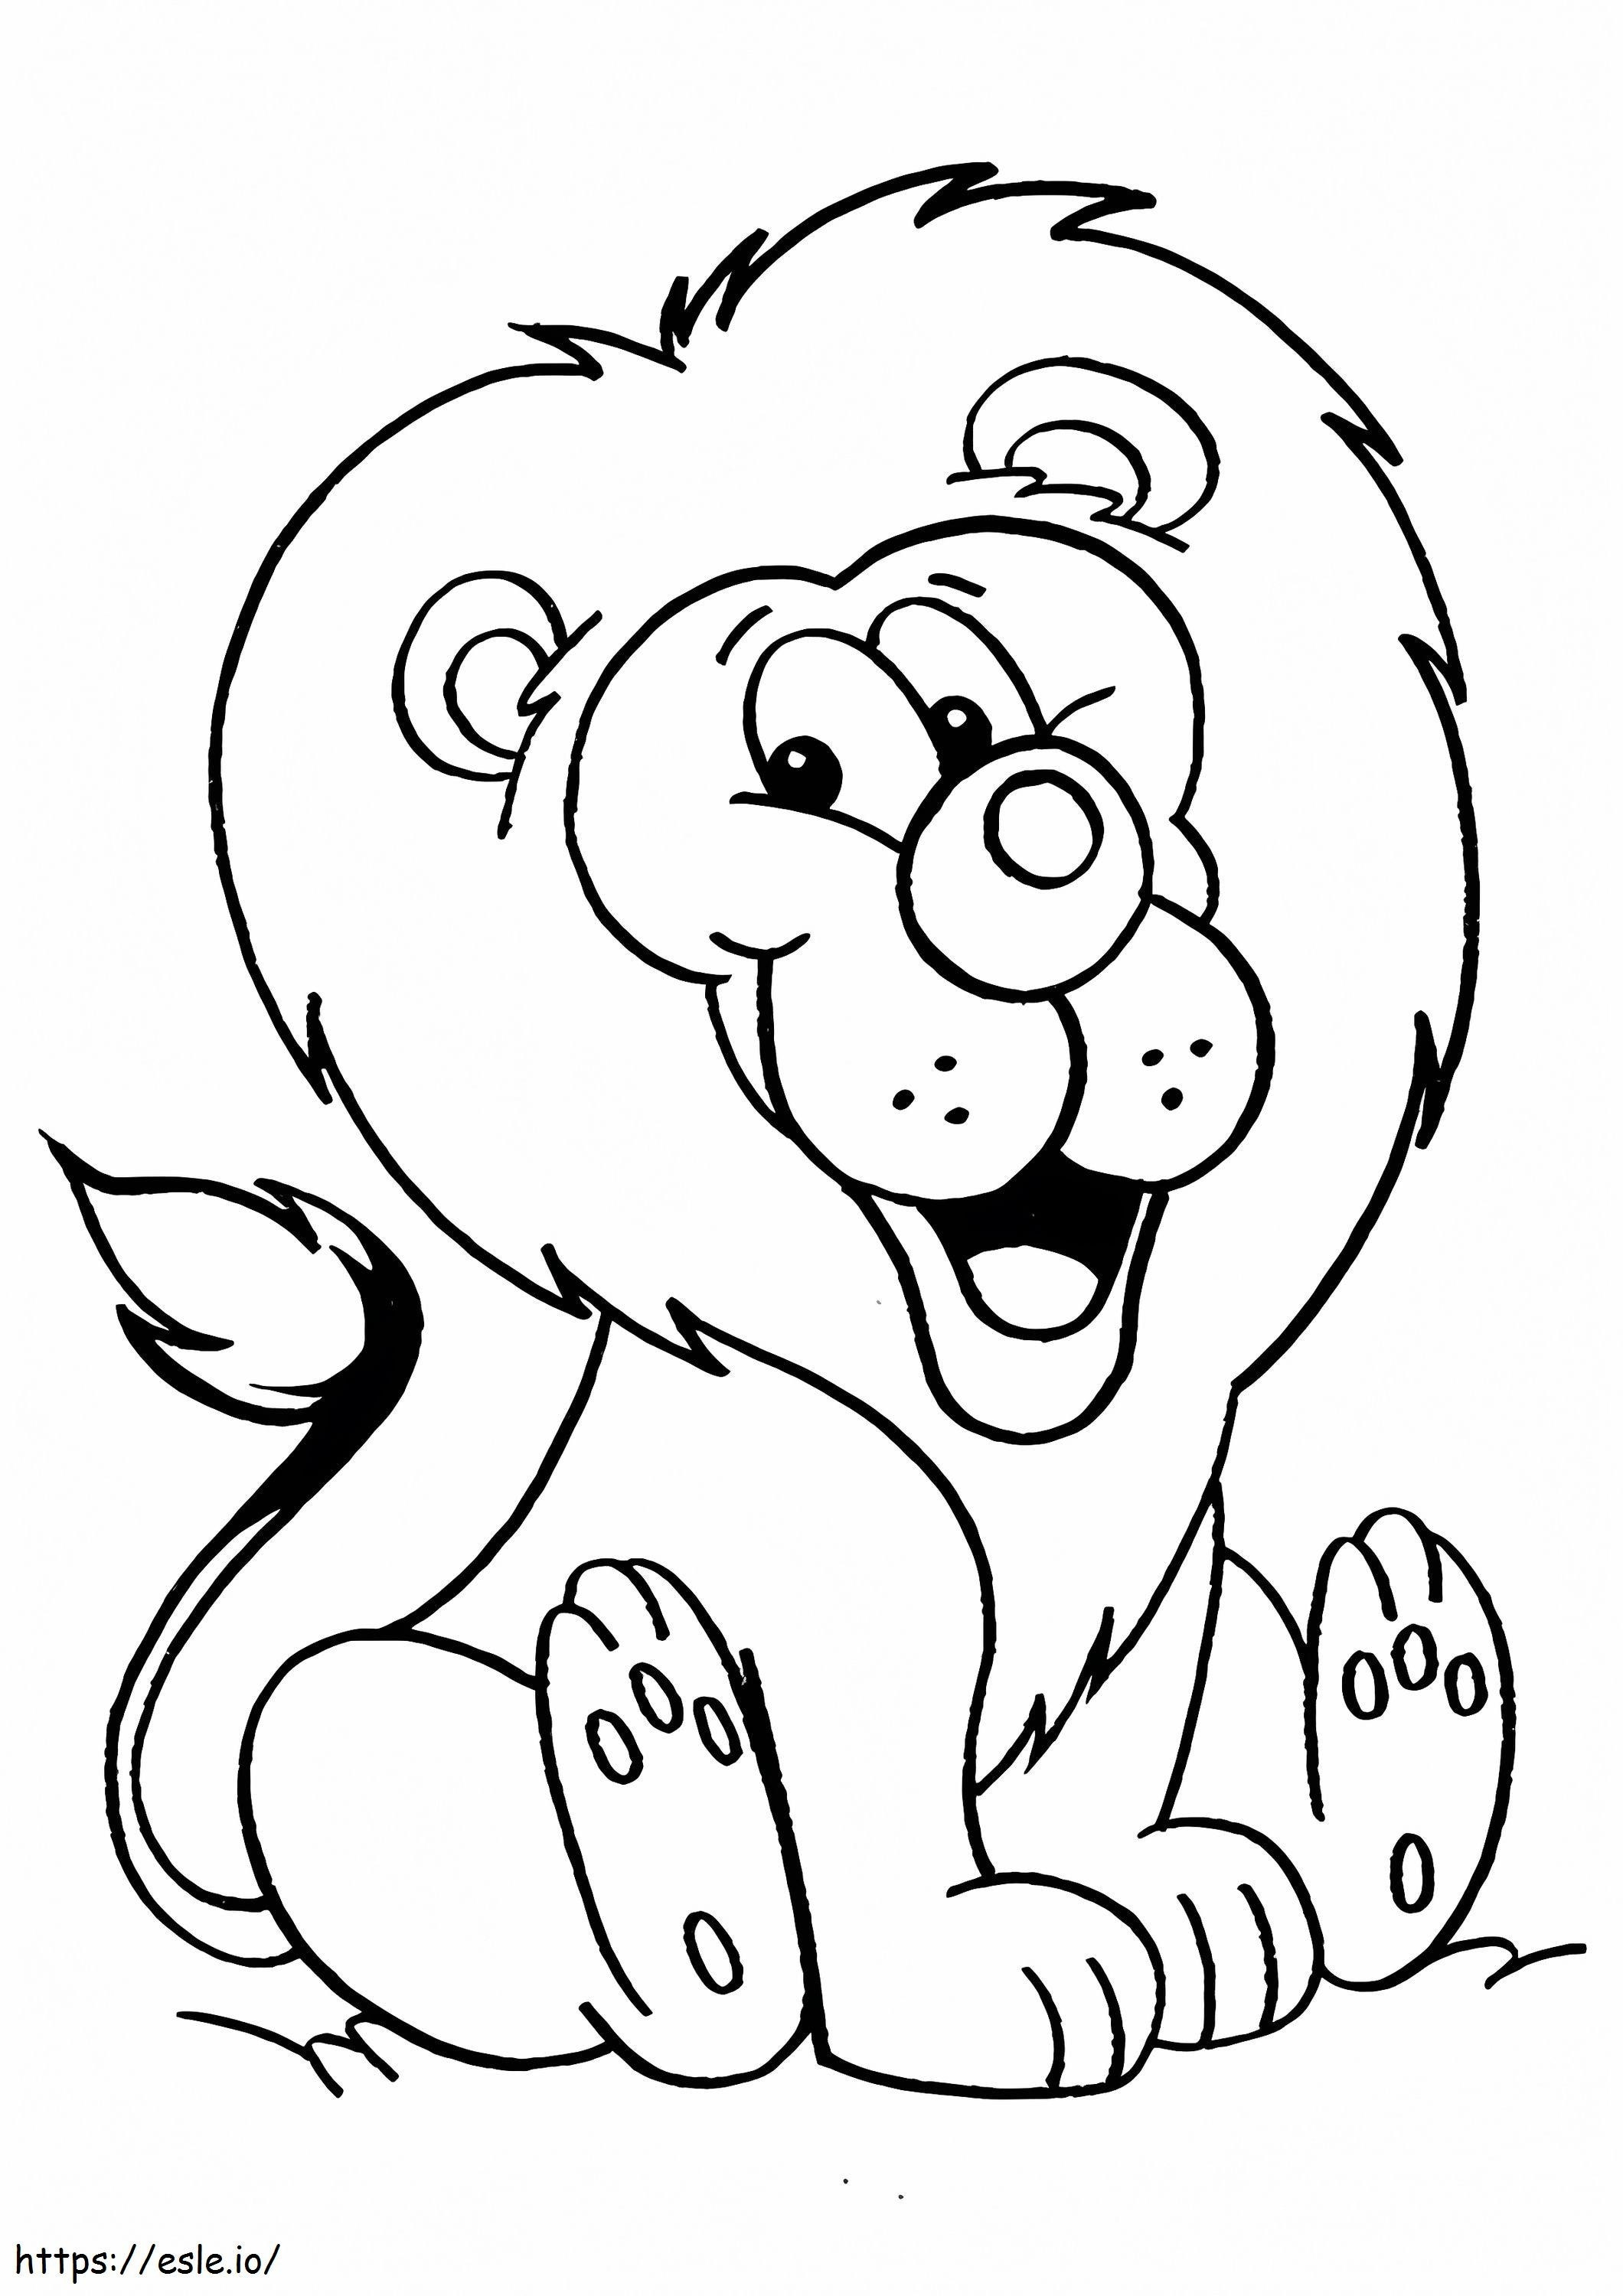 1528530607_The Cowardly Lion A4 2 coloring page